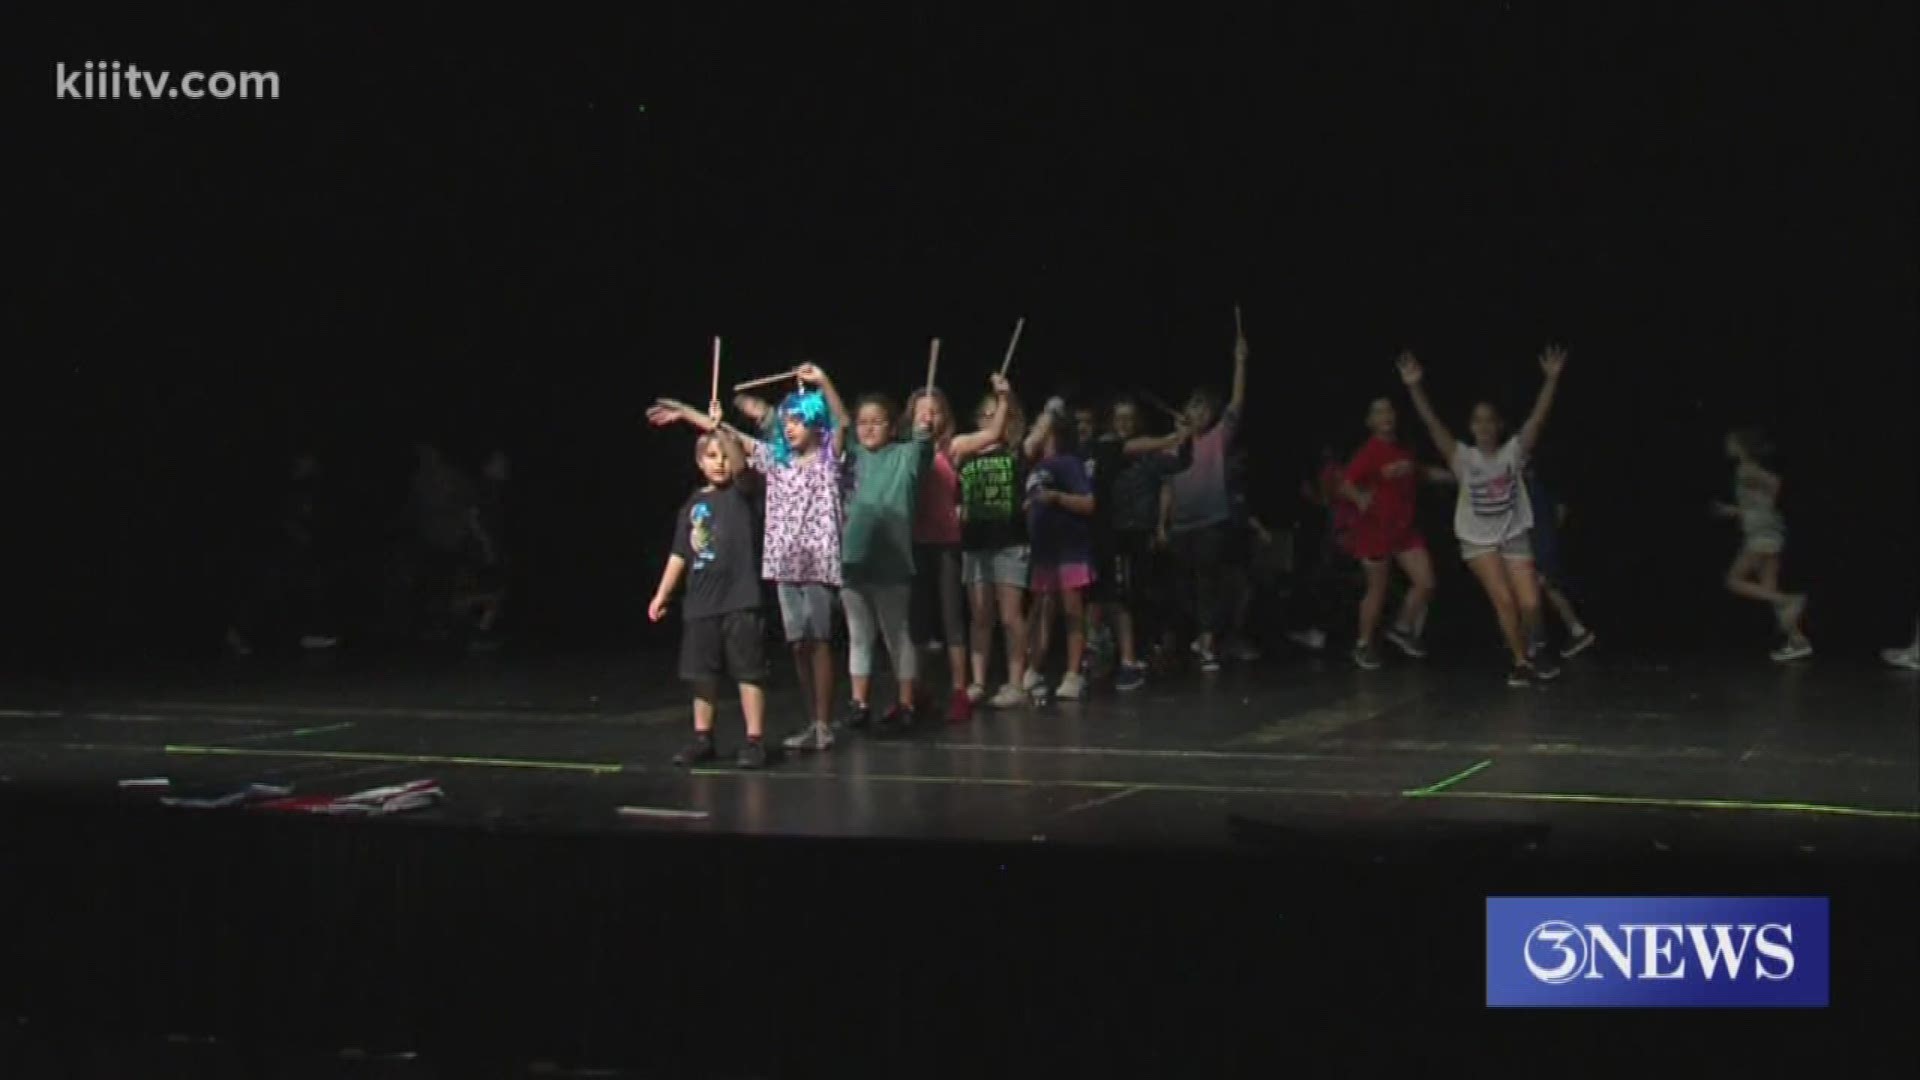 Kids from all over the Coastal Bend are invited to learn all about performance arts this summer.